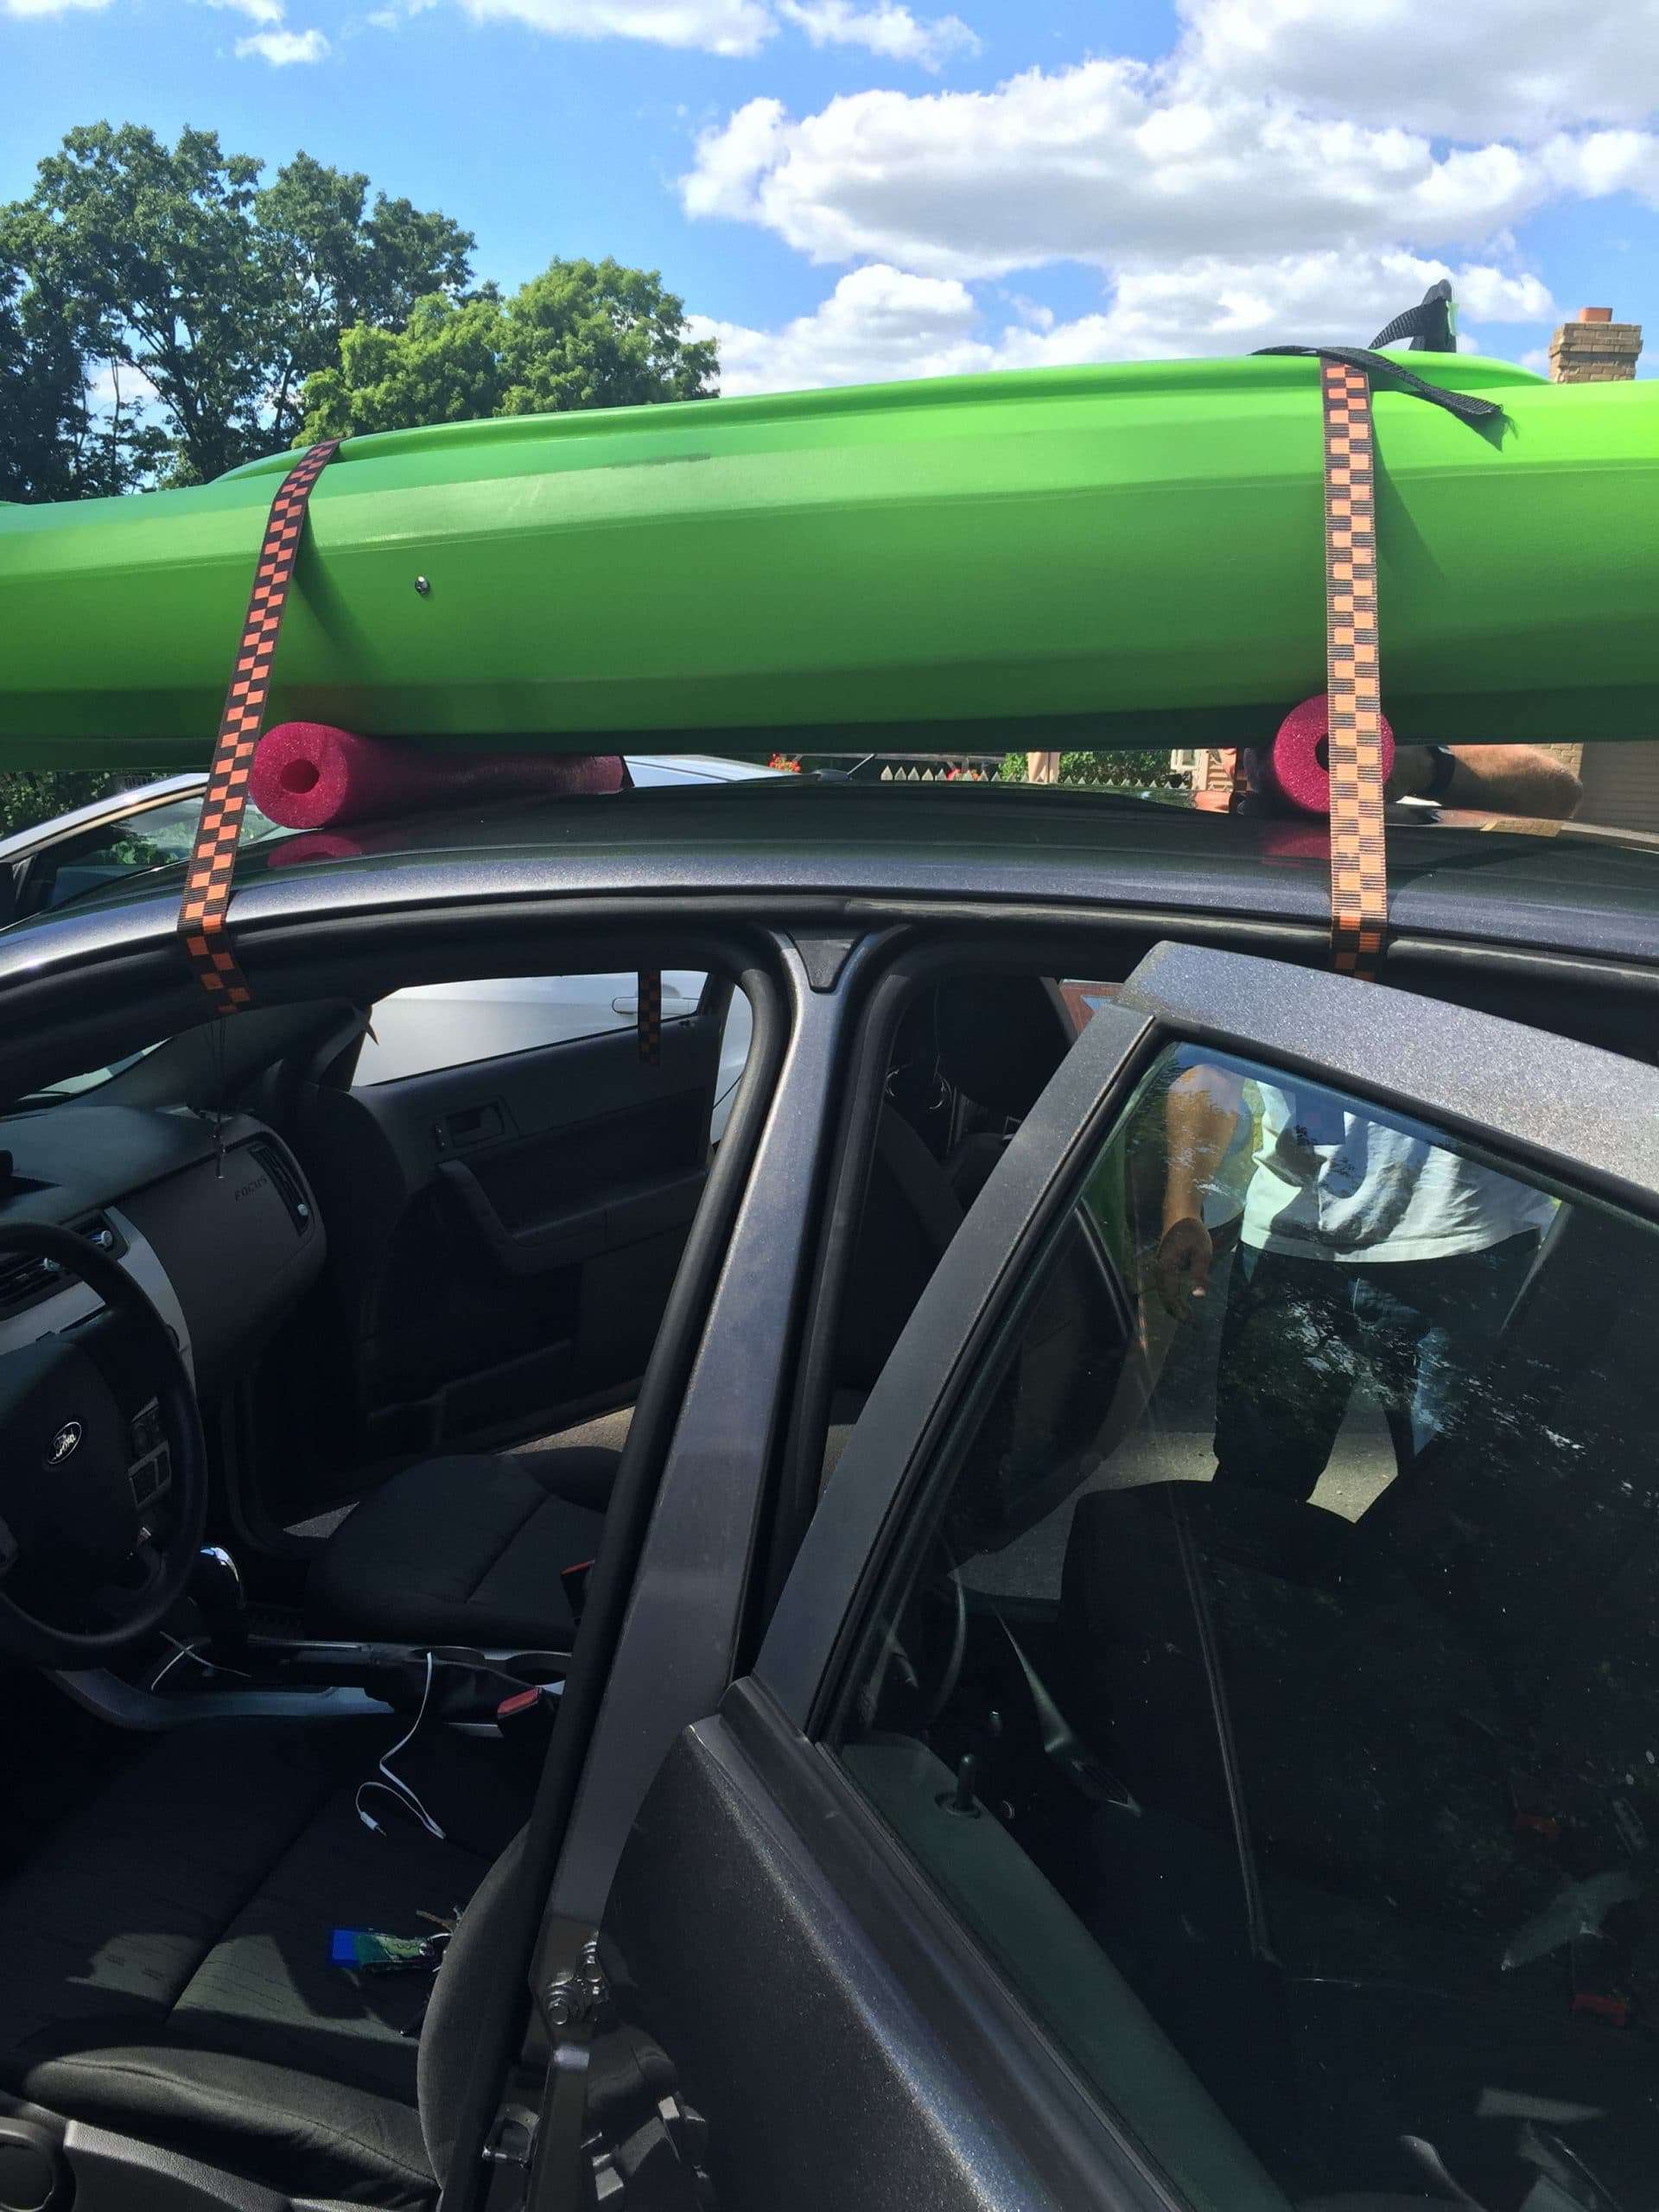 How to transport a kayak without a roof rack